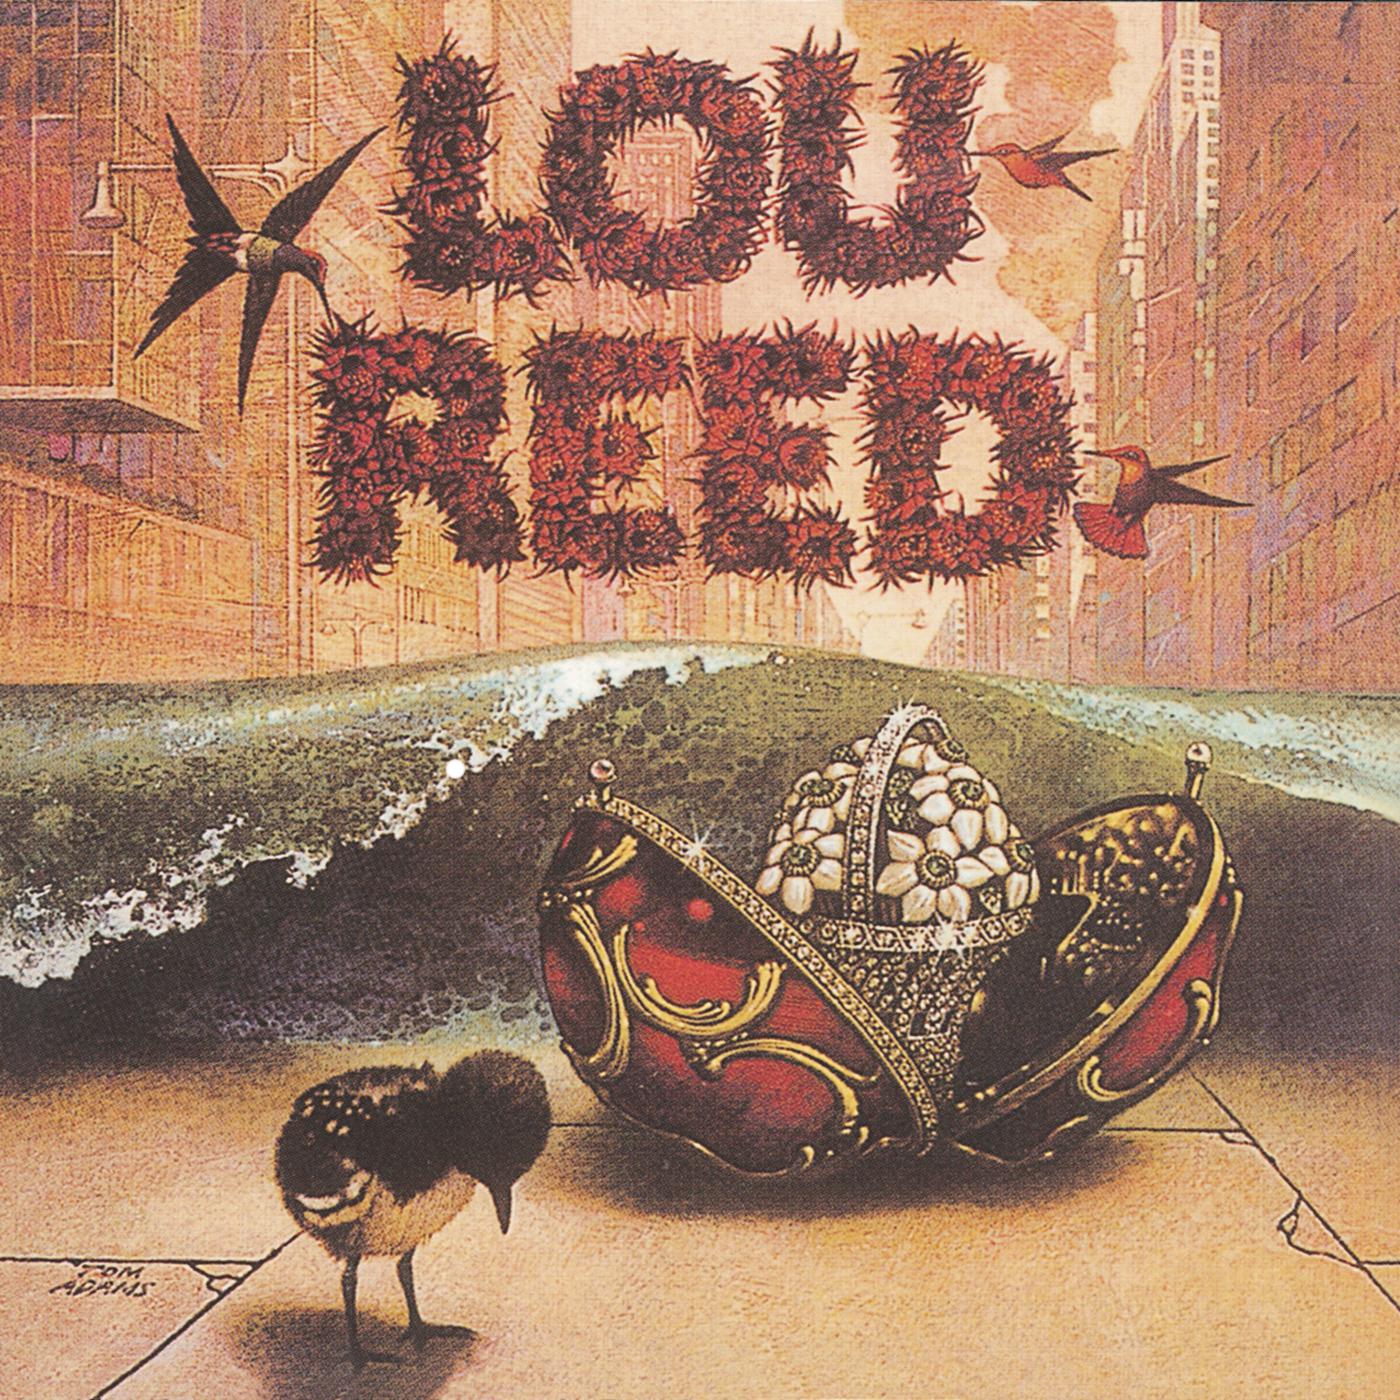 Lou Reed - I Can't Stand It